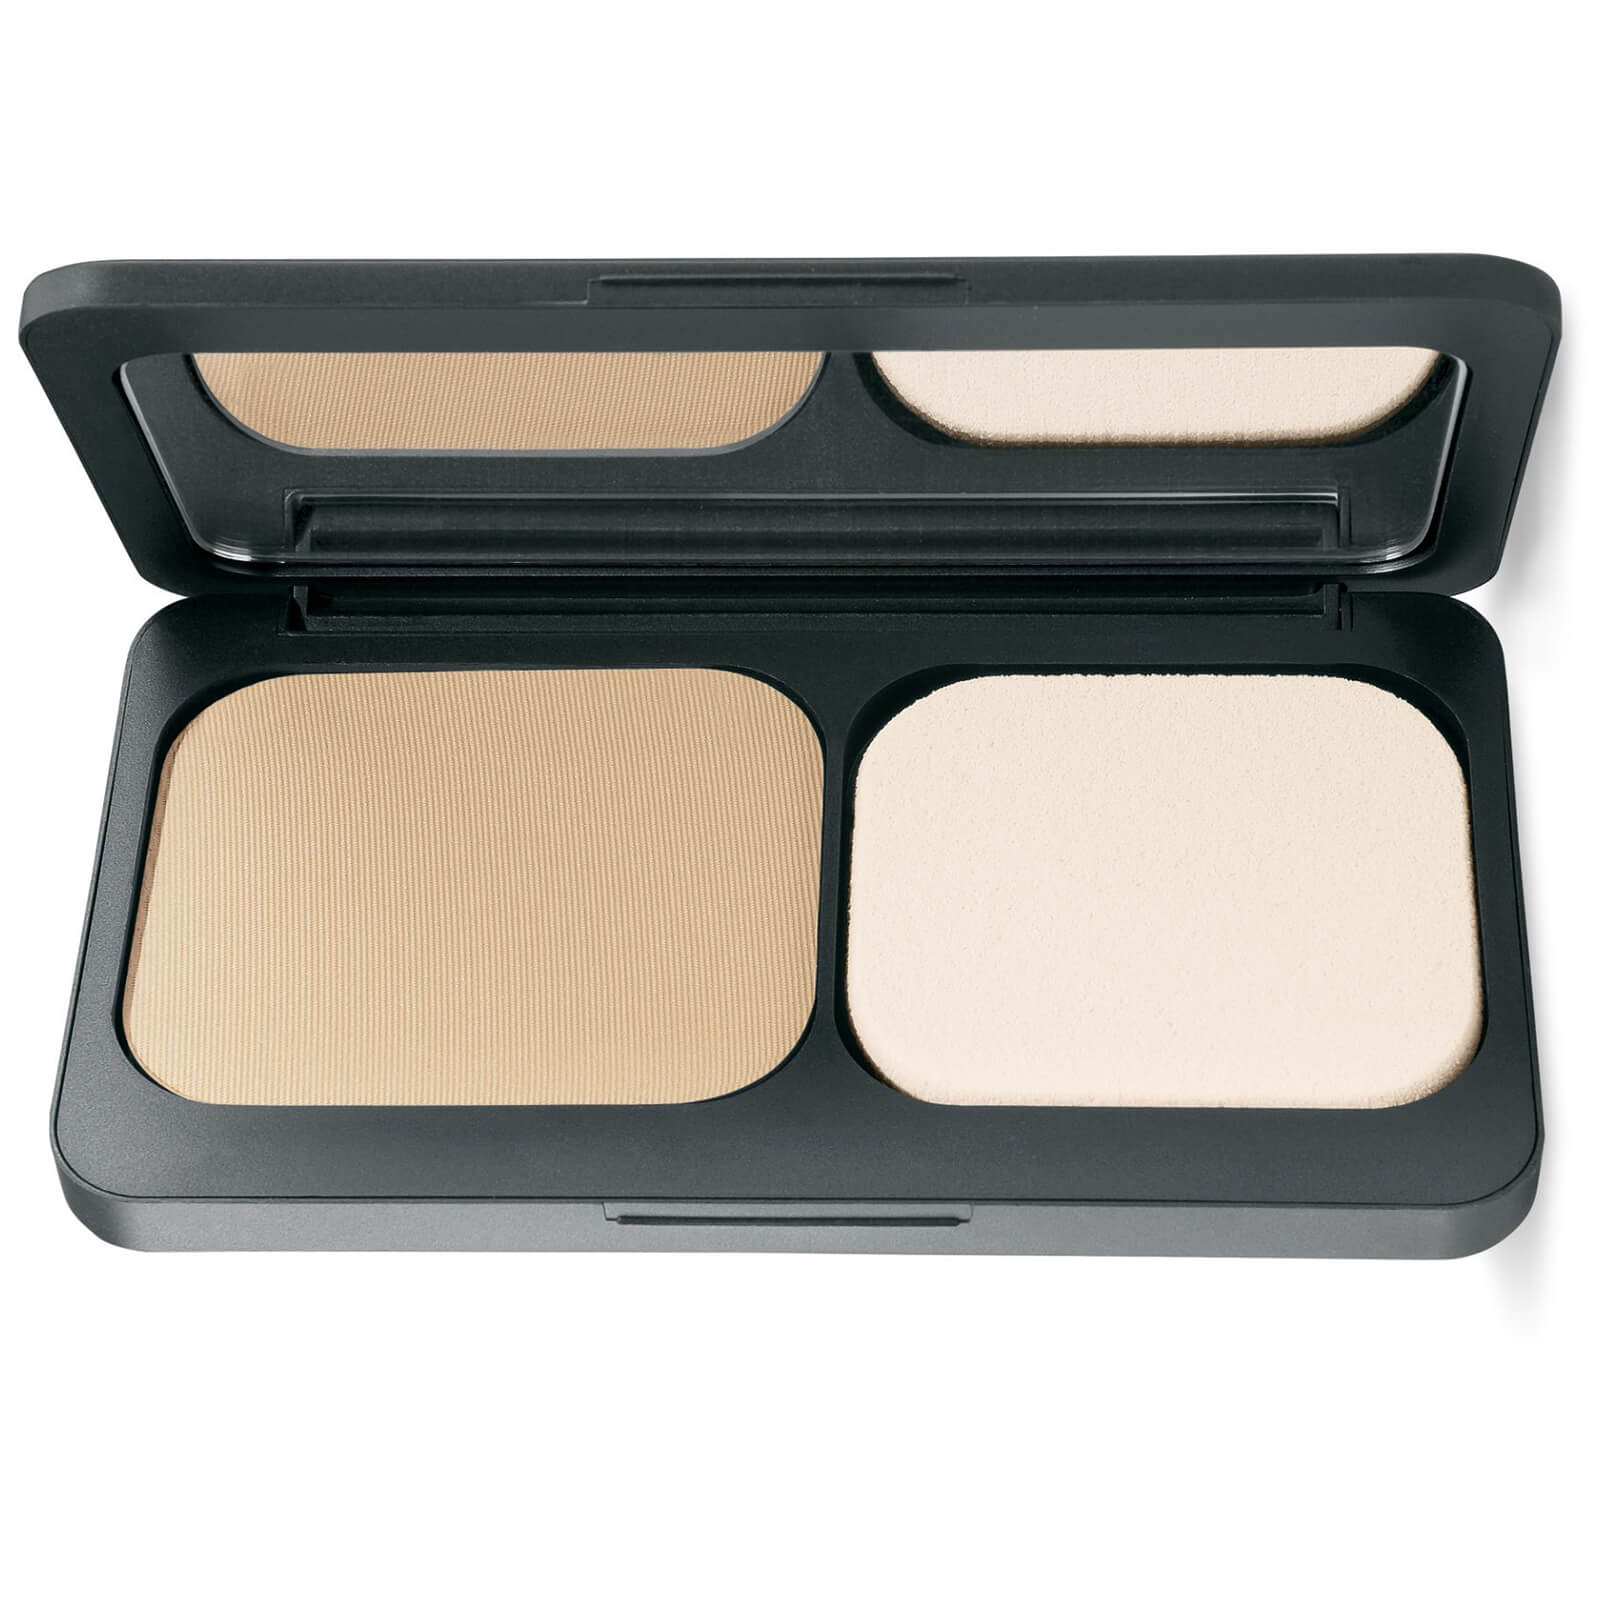 Youngblood Mineral Cosmetics Youngblood Pressed Mineral Foundation 8g (Various Shades) - Soft Beige